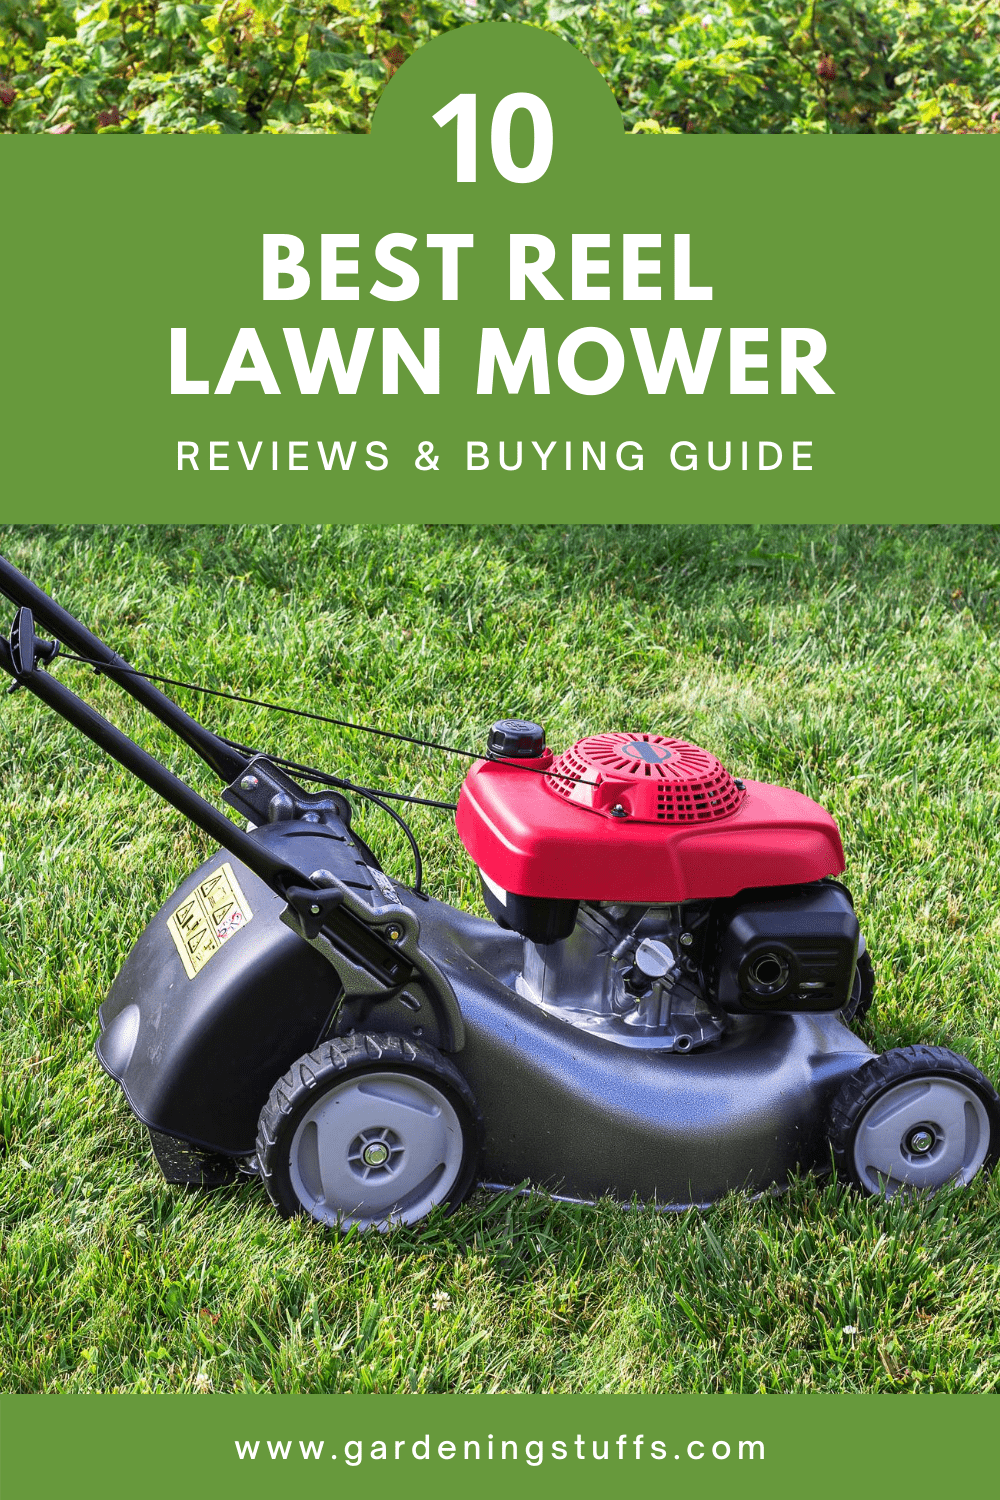 Reel mowers are quite easier to maintain than their gas-powered counterparts. But not all push reel mowers are created the same. That’s why we’ve handpicked the best reel lawn mowers for you and included a buying guide at the end to help you pick the reel mower that best suits your lawn maintenance needs. Learn more about gardening tips @ #GardeningStuffs